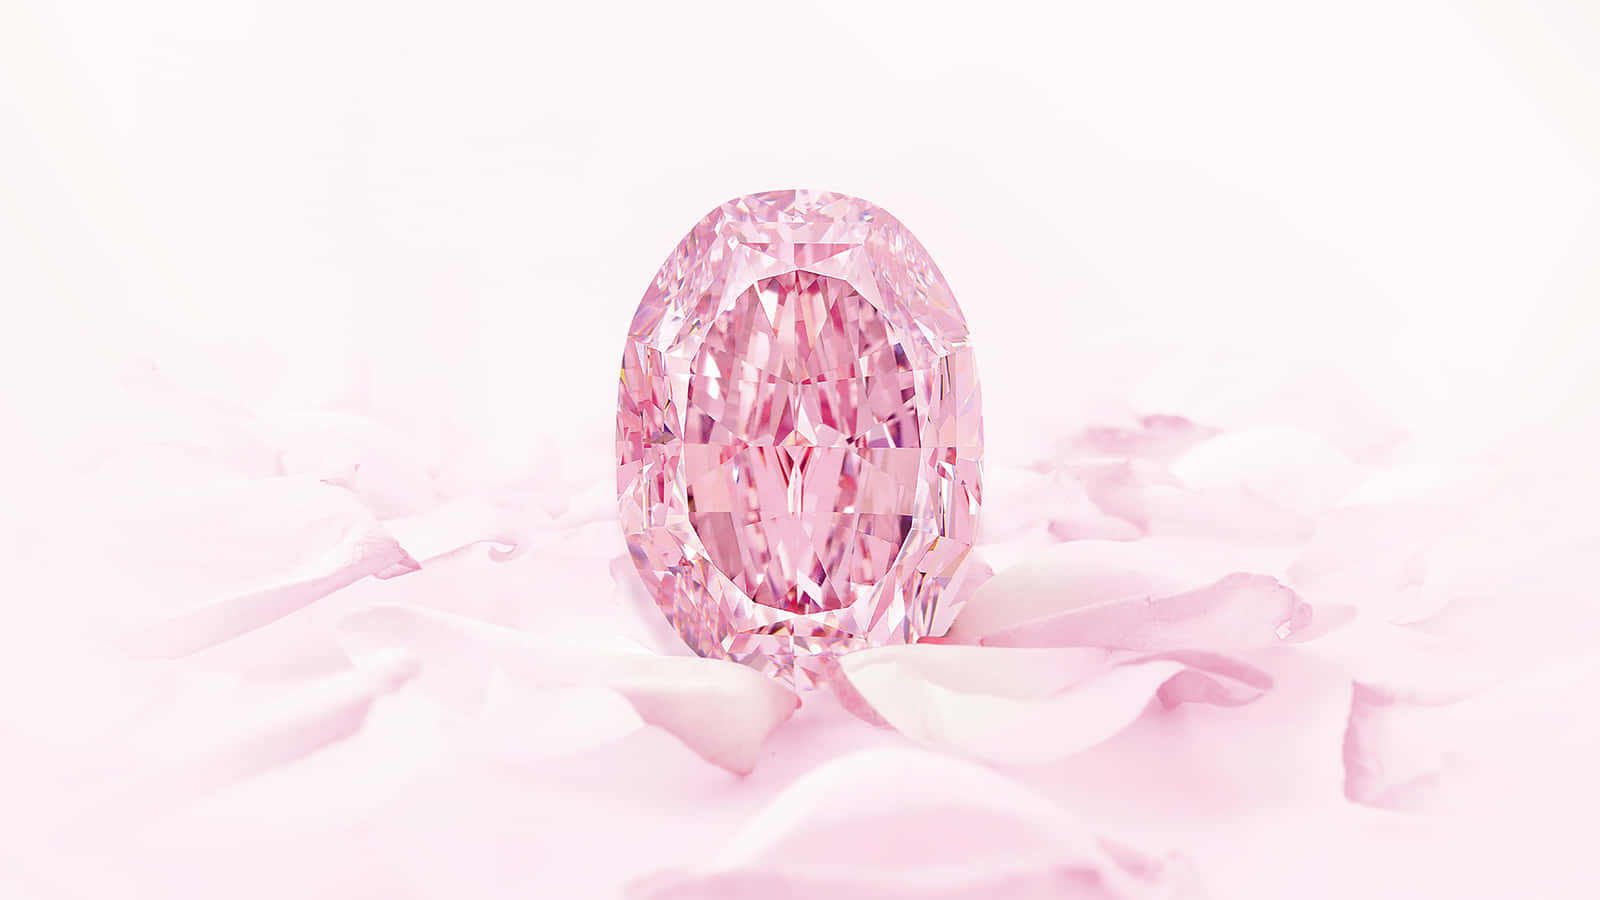 A brilliant pink diamond against a blue background.